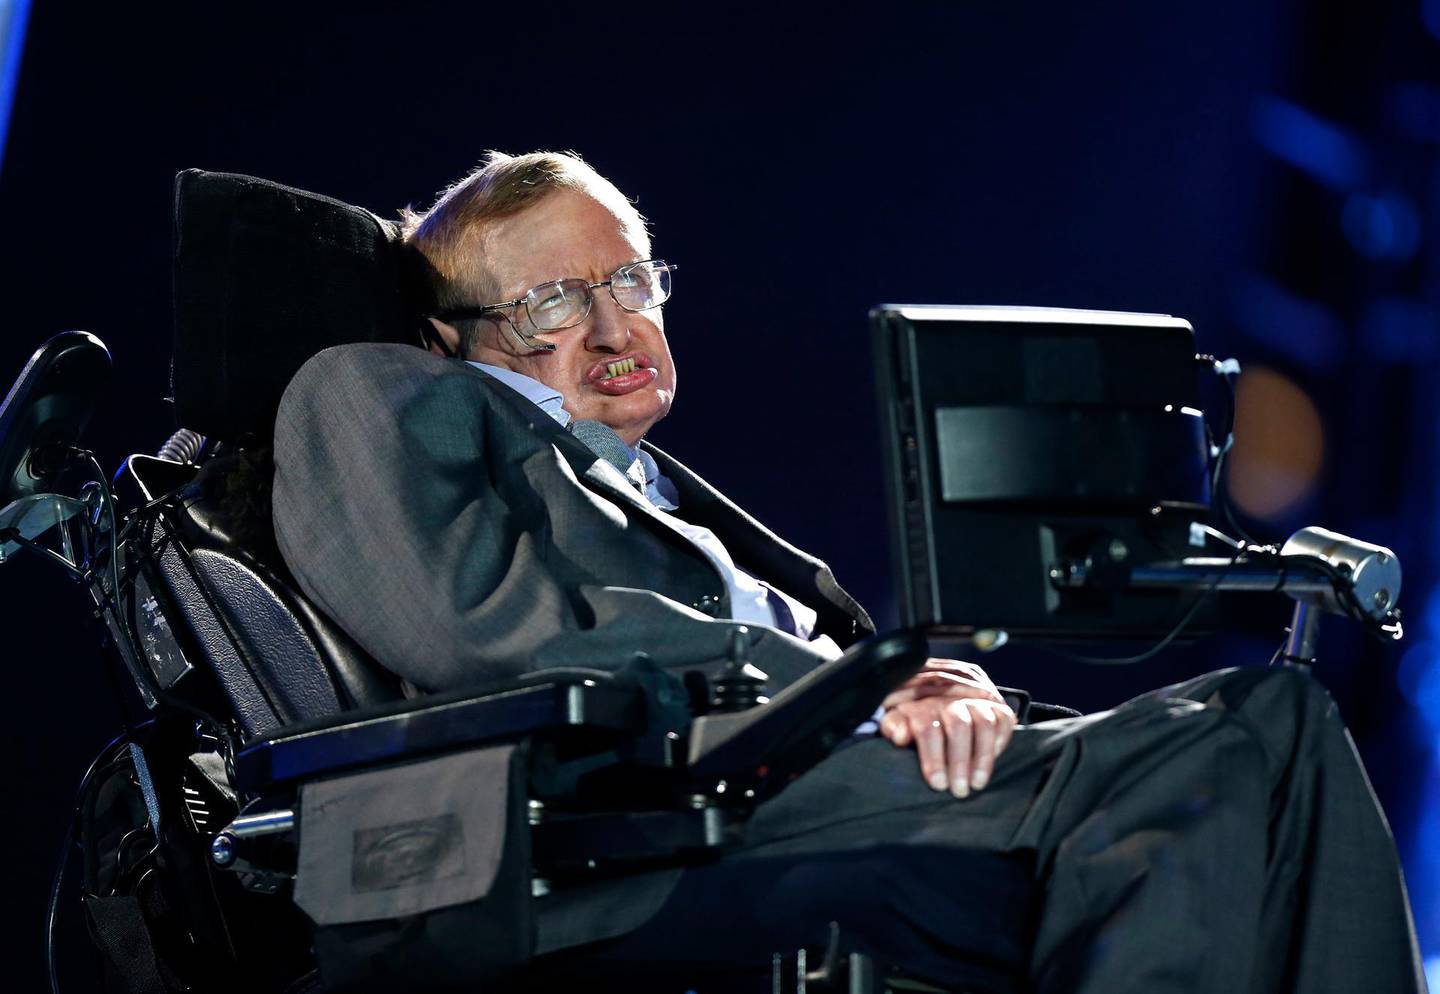 FILE - In this Aug. 29, 2012 file photo, British physicist, Professor Stephen Hawking during the Opening Ceremony for the 2012 Paralympics in London.  Hawking will take his place among Britain's greatest scientists when his ashes are buried in Westminster Abbey, Friday June 15, 2018, between the graves of Charles Darwin and Isaac Newton, during a service of thanksgiving for the physicist who died in March 2018. (AP Photo/Matt Dunham, File)